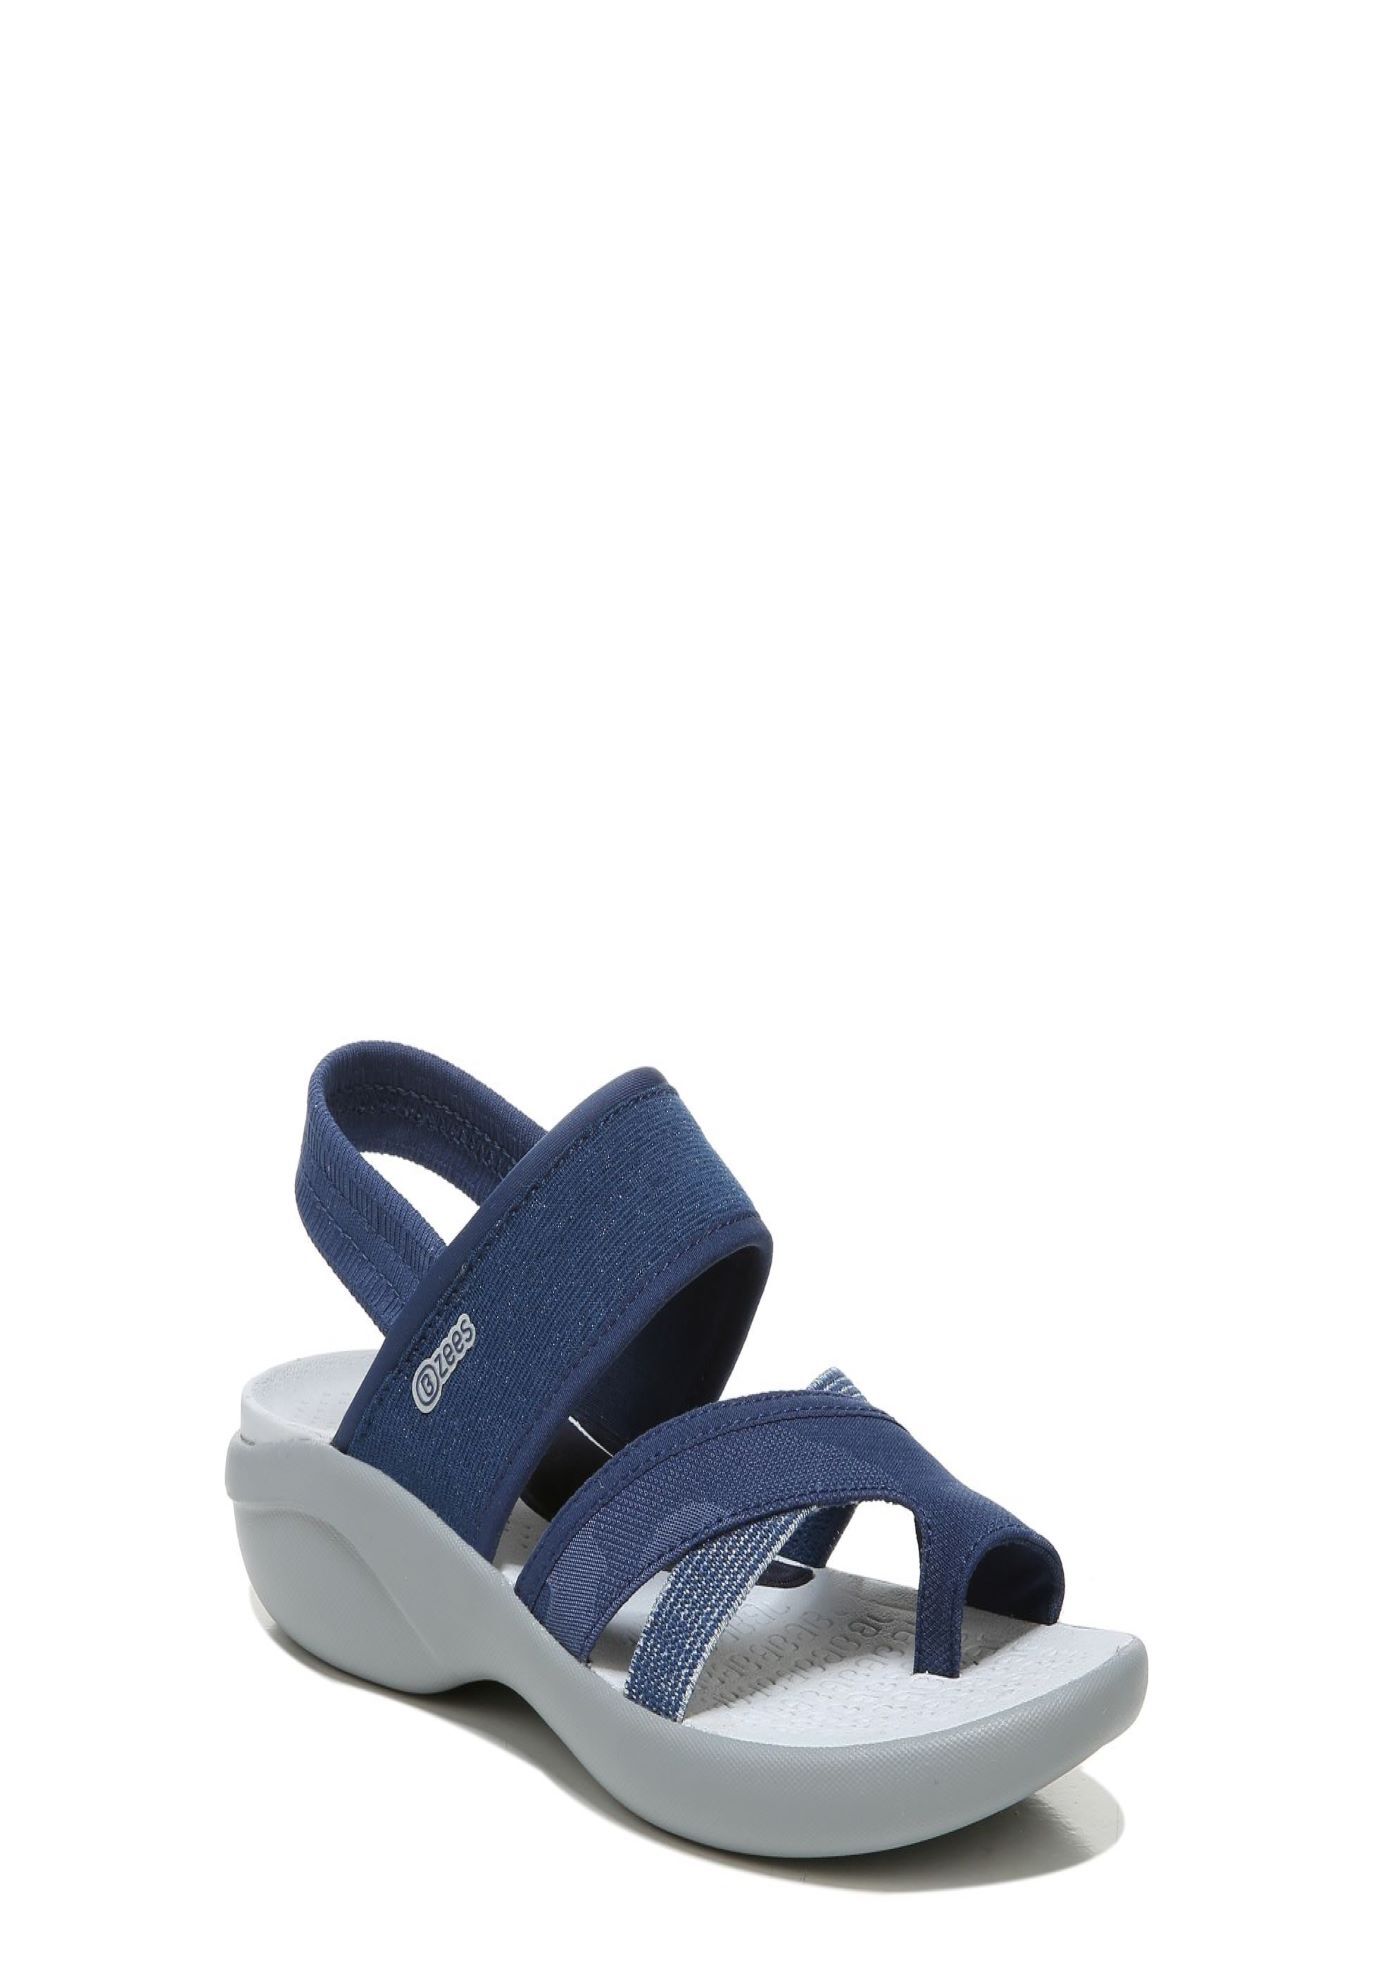 Wide Width Women's Call Me Sandals by BZees in Navy (Size 7 W)